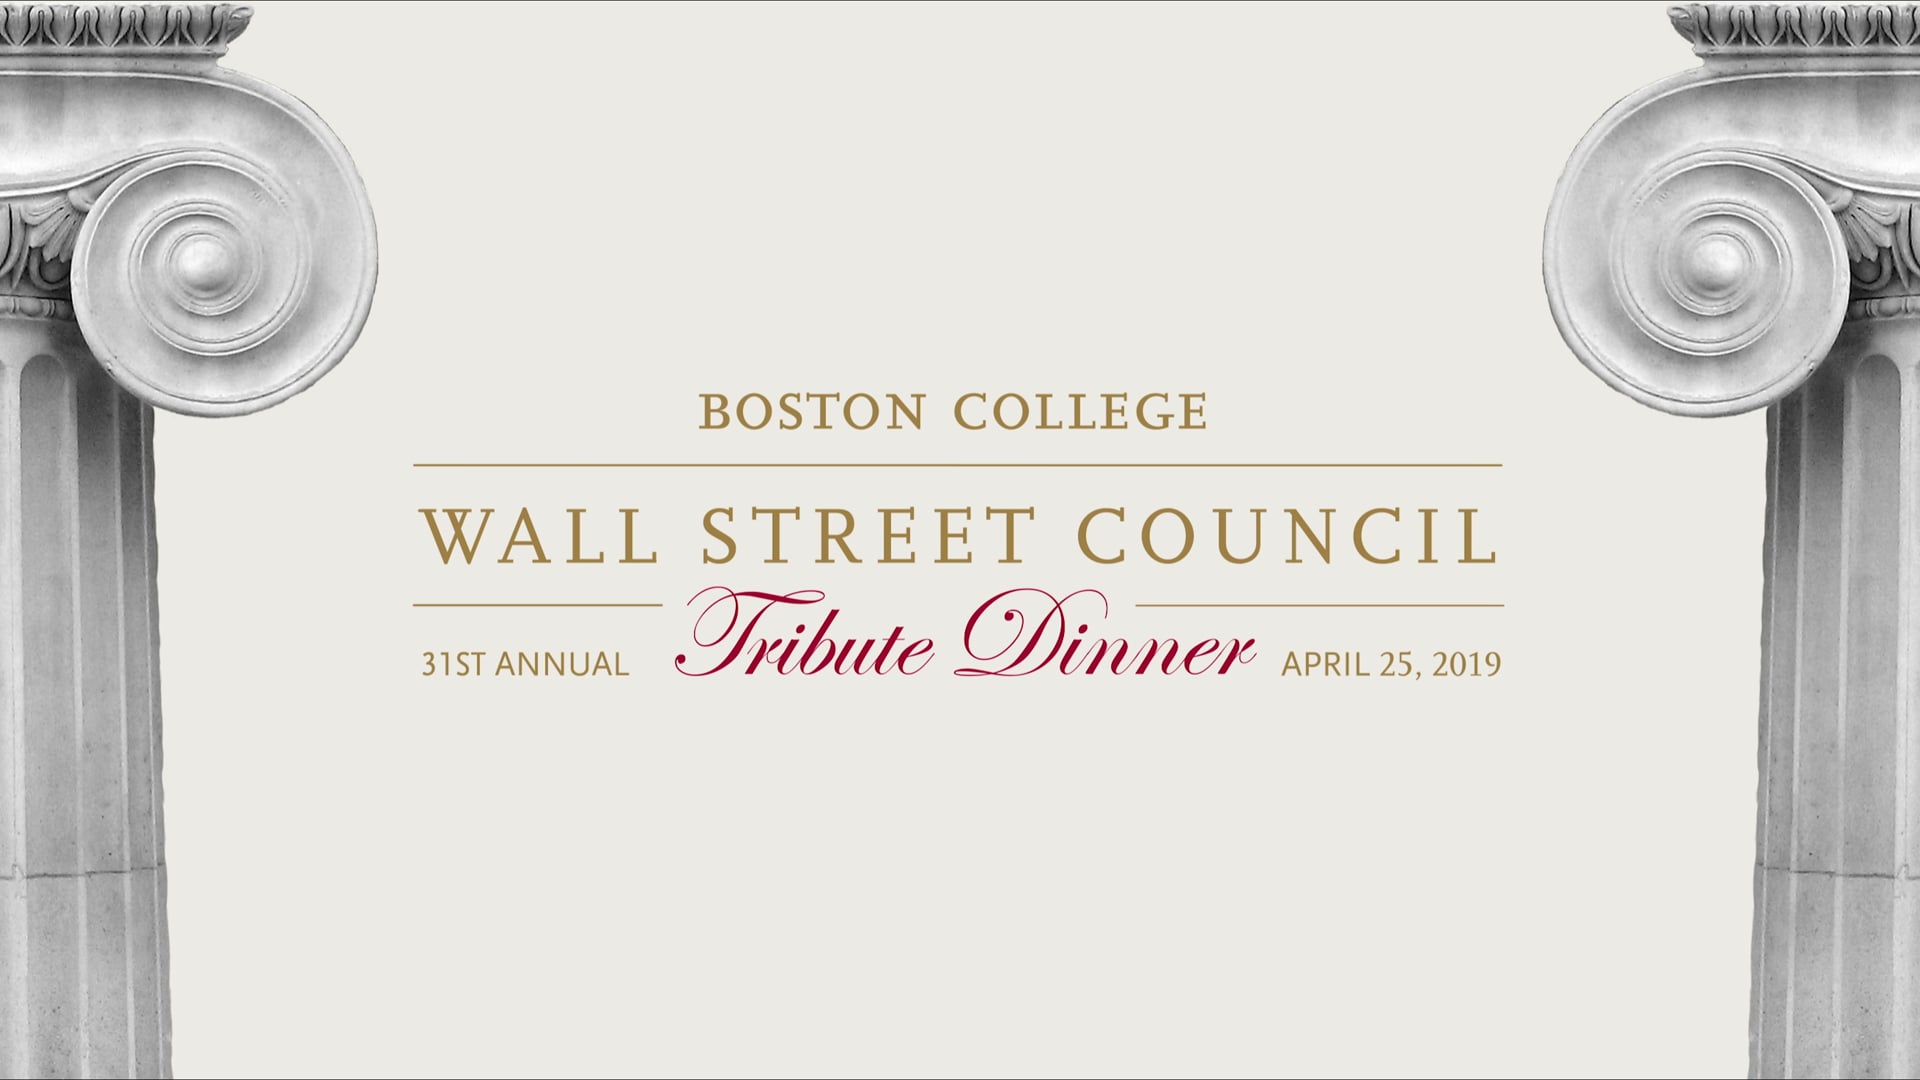 Wall Street Council Tribute Dinner Video 2019